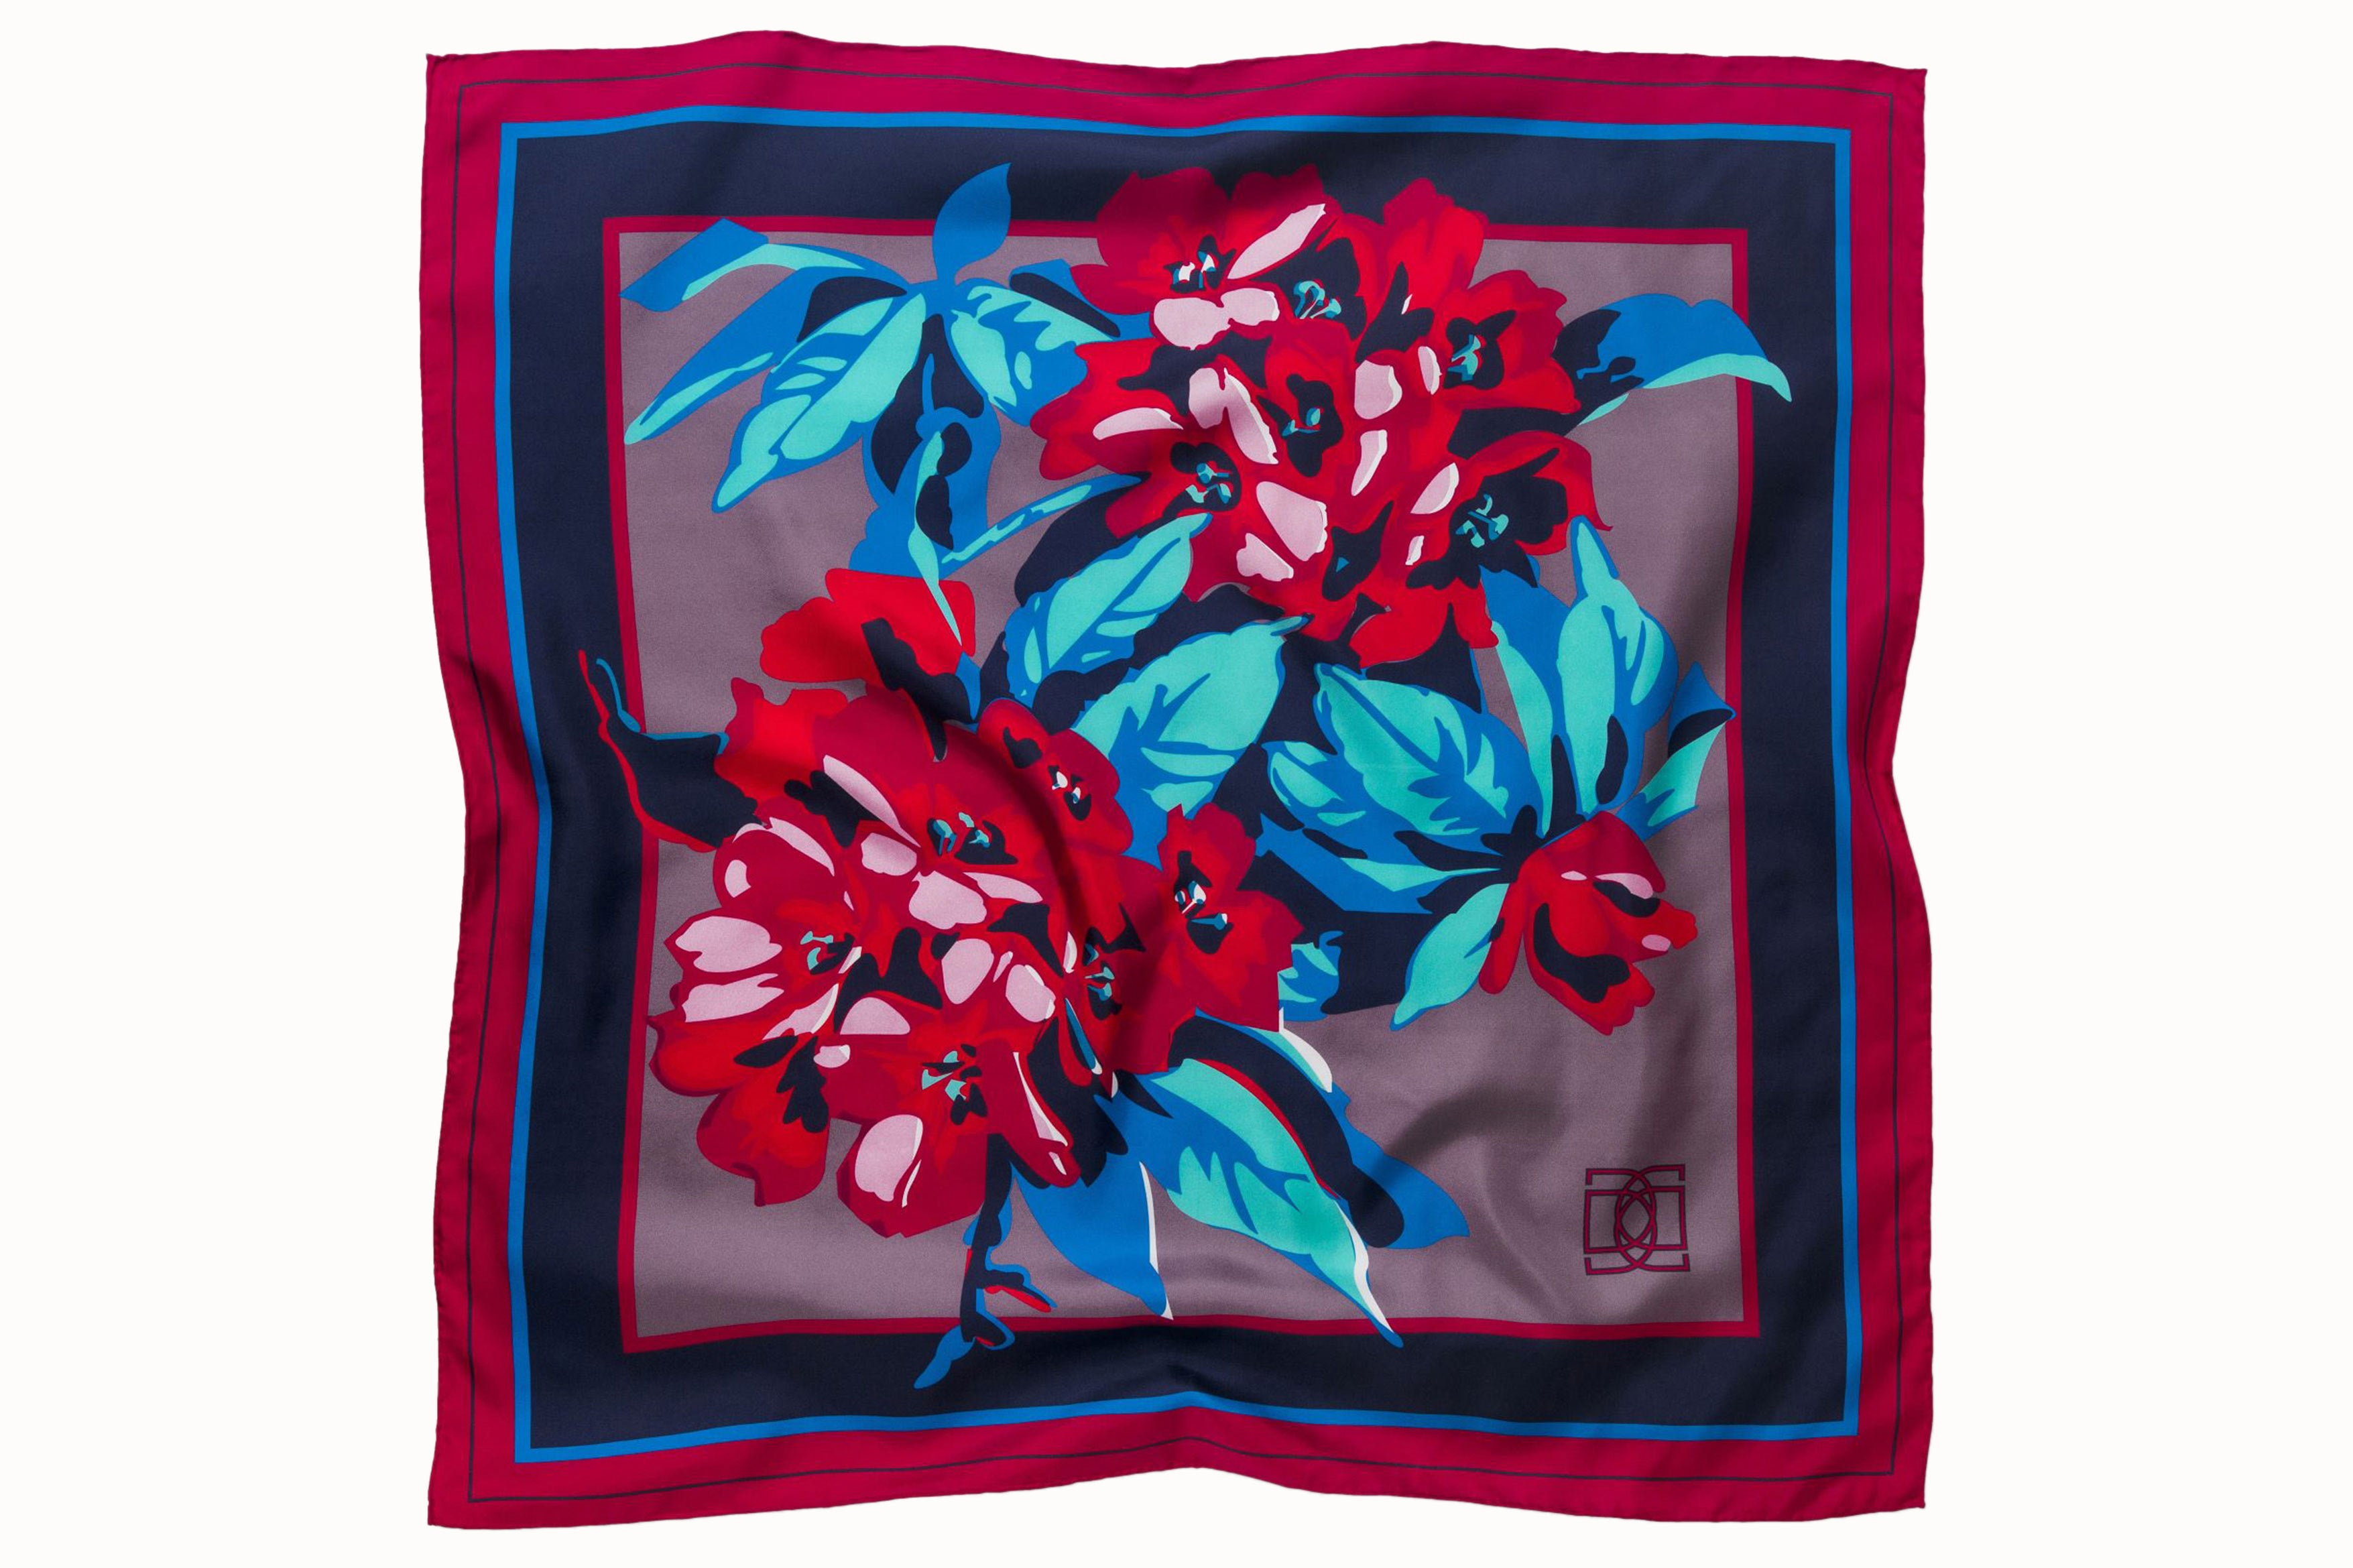 Flatlay image of 100% silk square scarf featuring a motif of large-scale florals and leaves in shades of rich red, magenta, berry and marine blues on a background of smoky lilac, with a dark blue and magenta border around the edges.